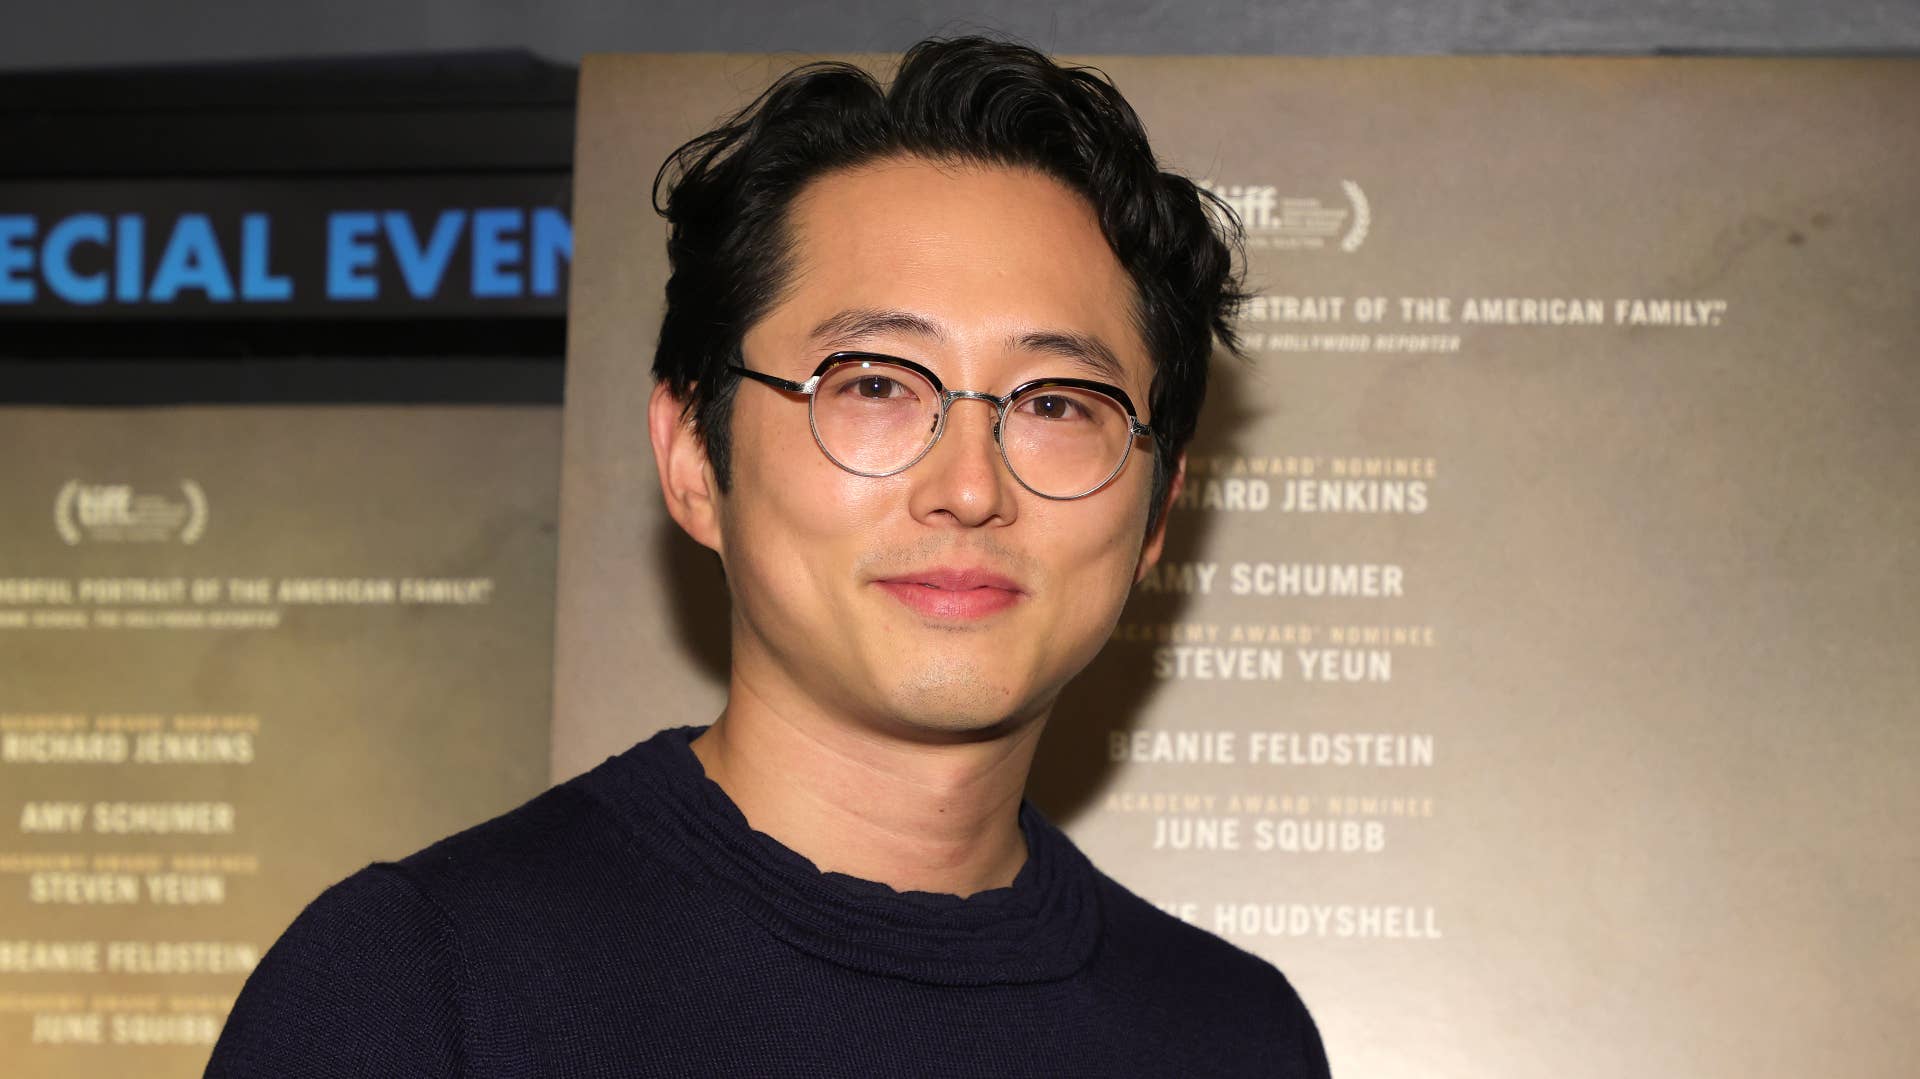 Steven Yeun seen on the red carpet of a movie screening.